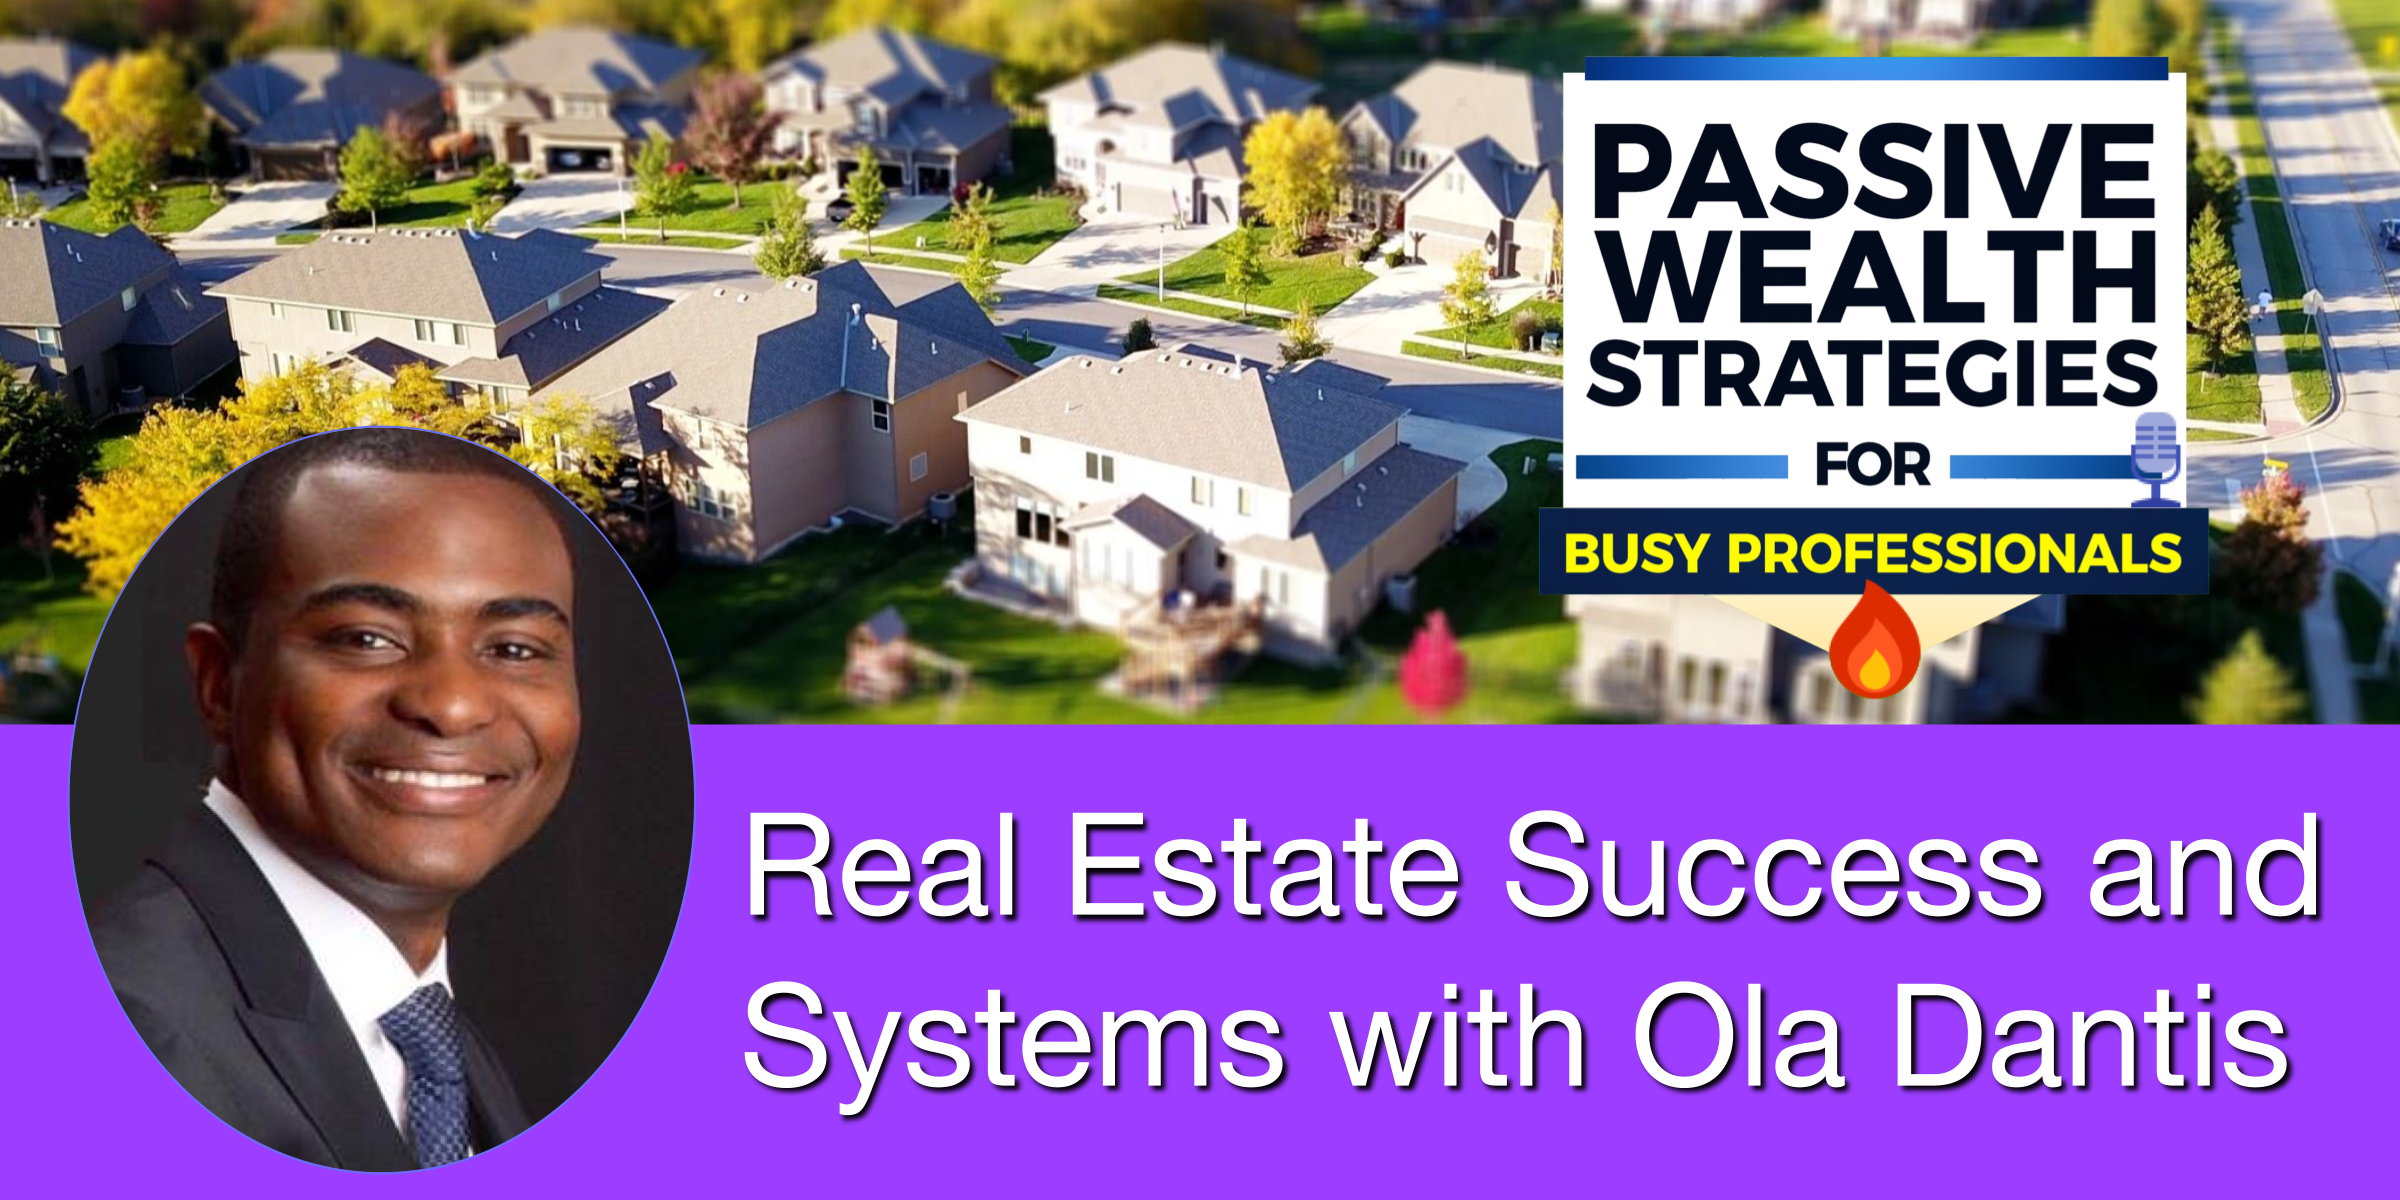 Real Estate Success and Systems with Ola Dantis Title Card